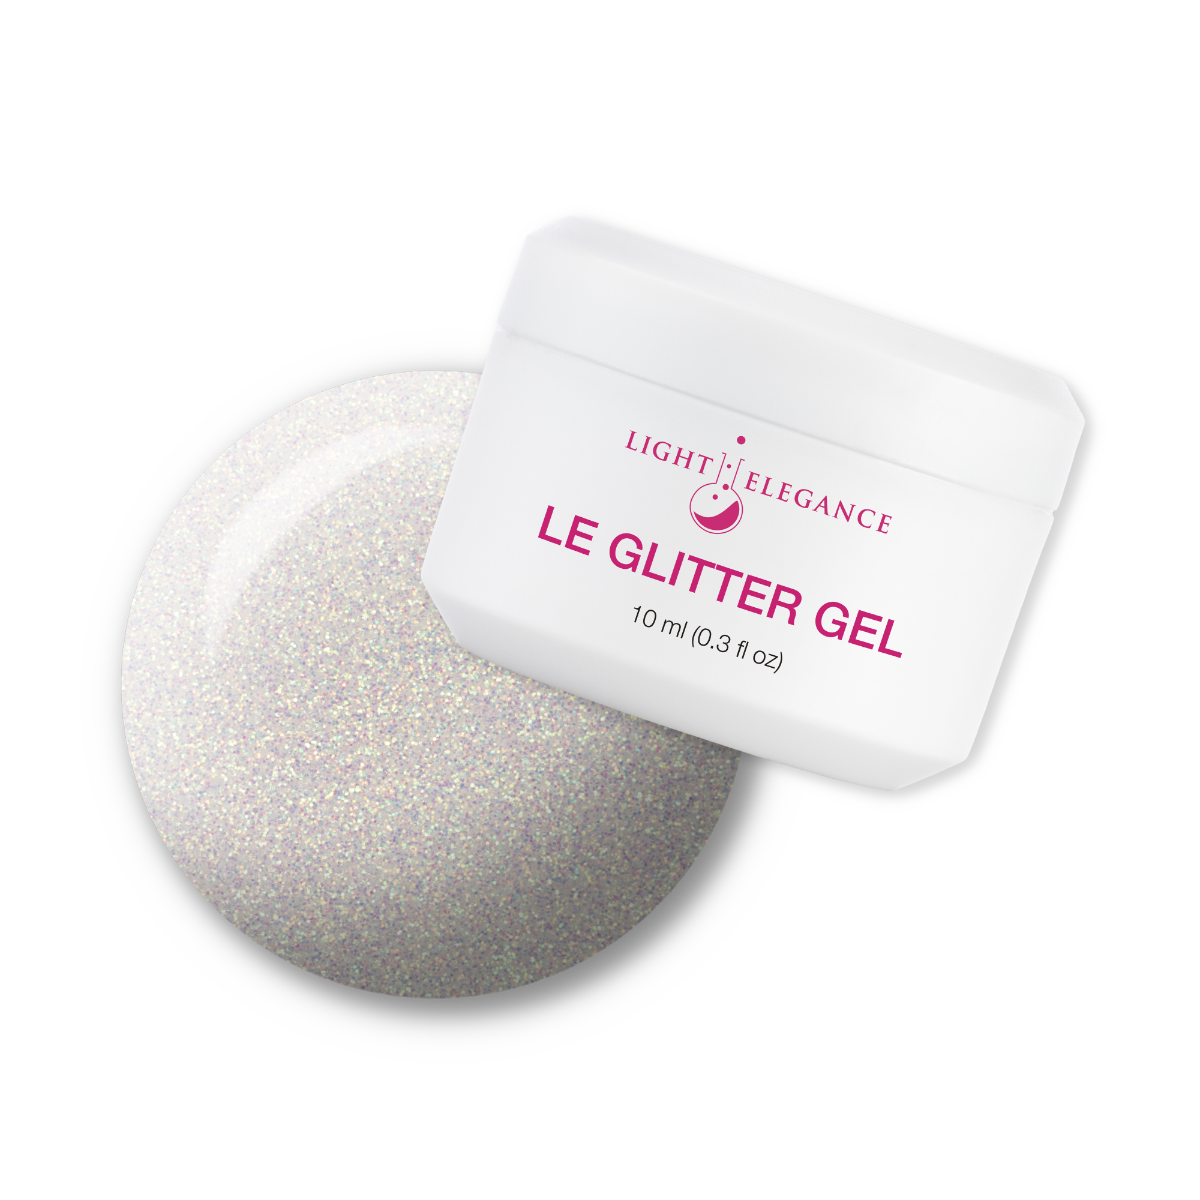 Light Elegance Glitter Gel - Go-Go Boots :: New Packaging - Creata Beauty - Professional Beauty Products